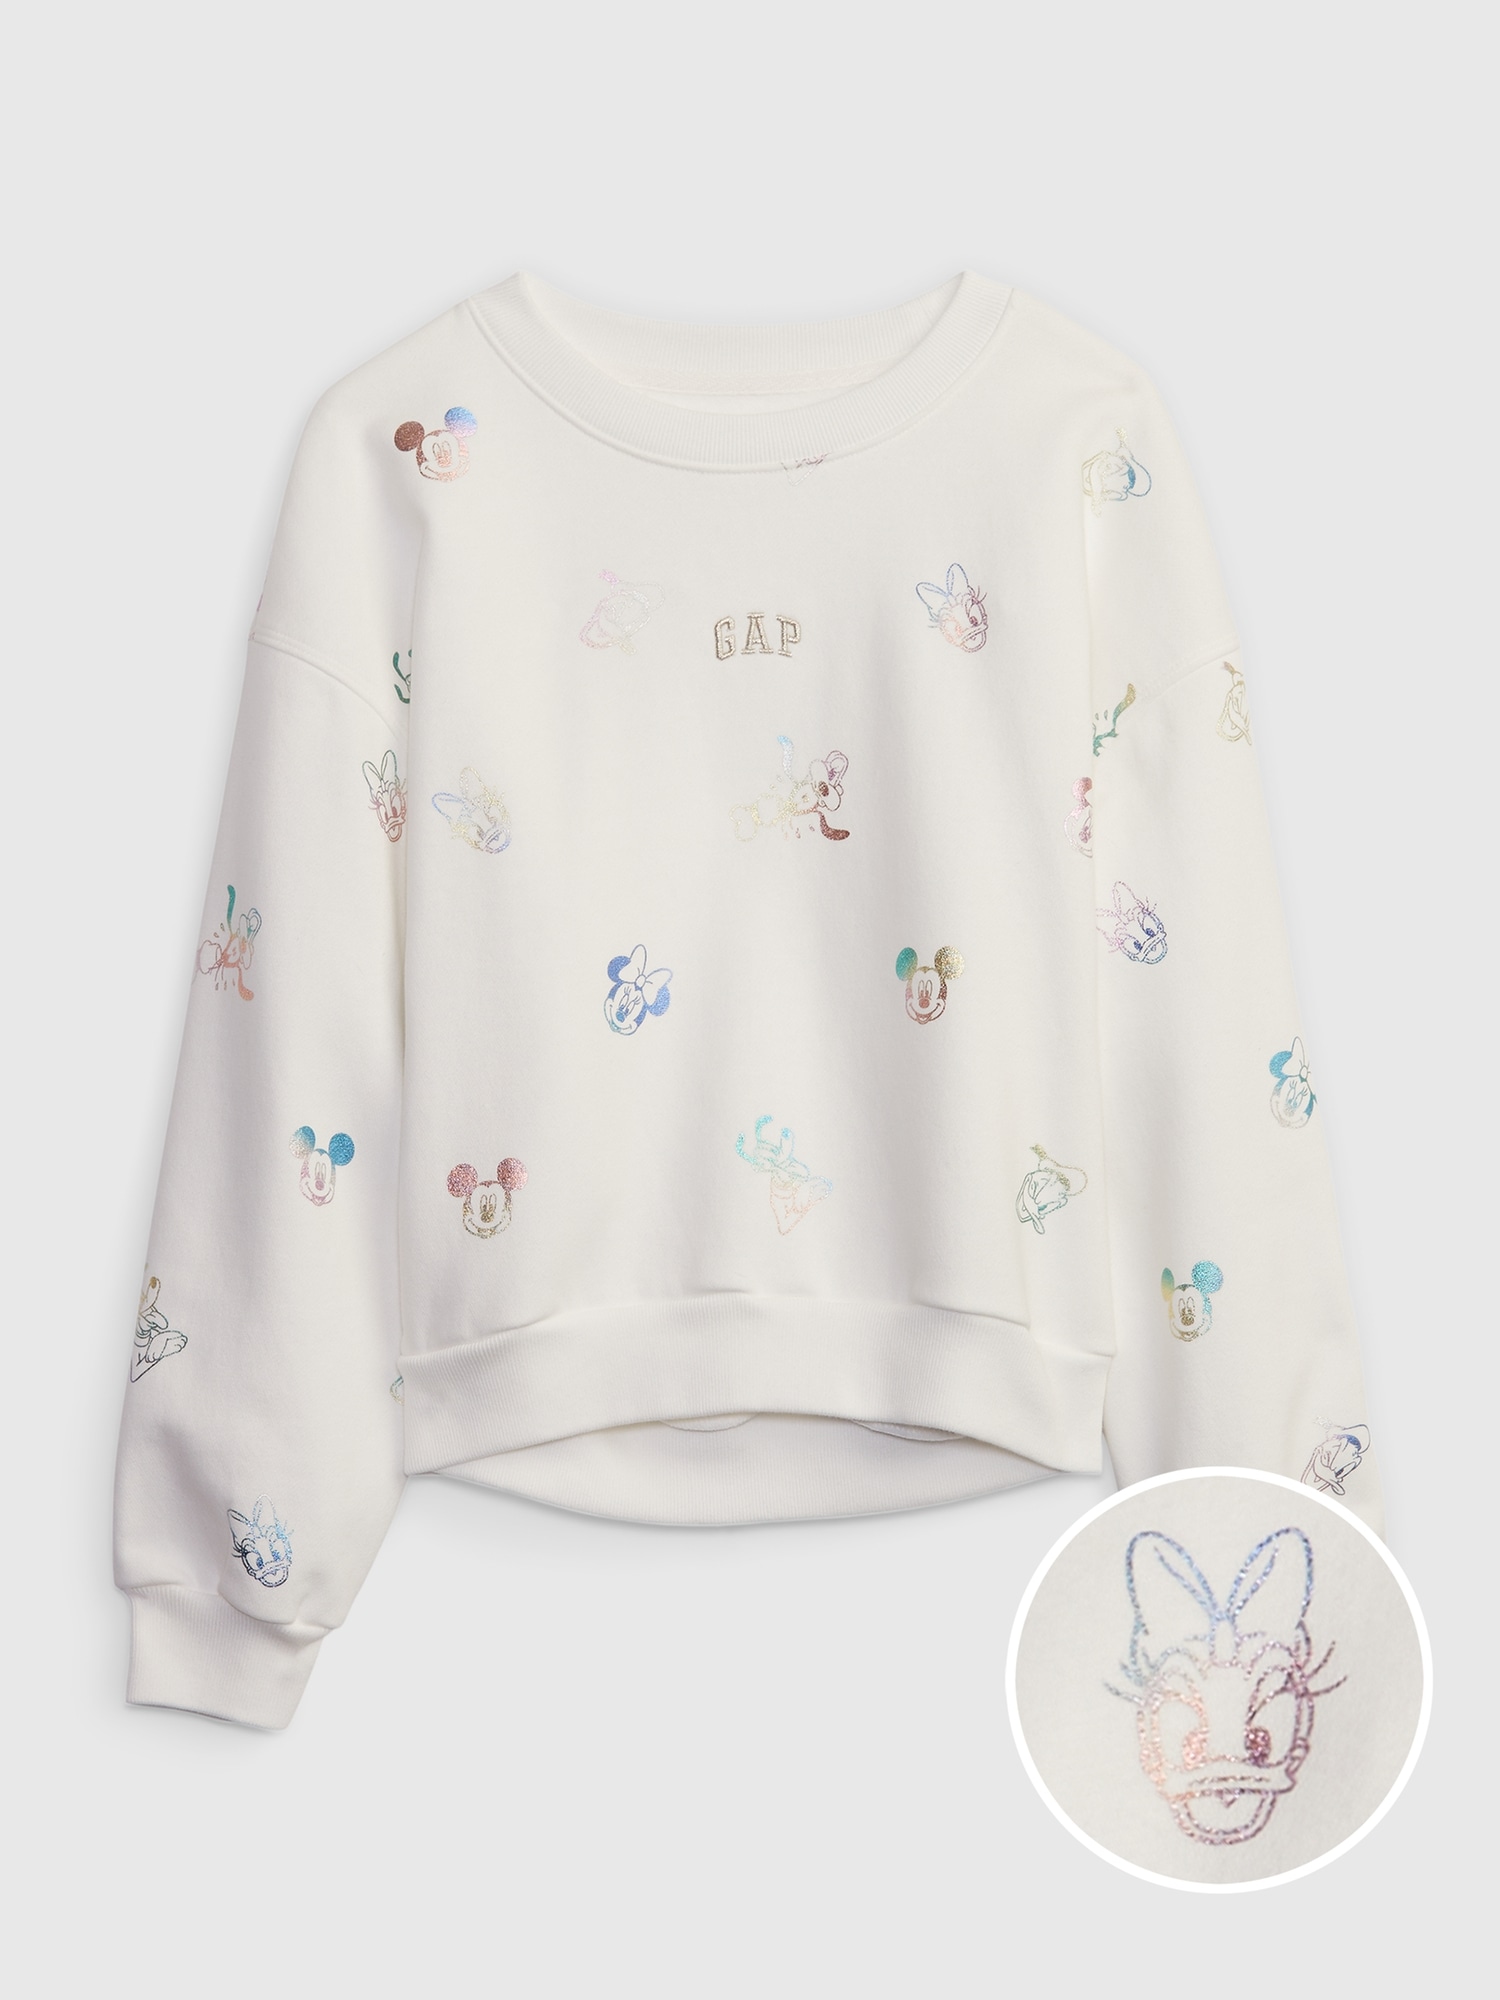 Sweatshirt with Printed Design - White/Mickey Mouse - Ladies